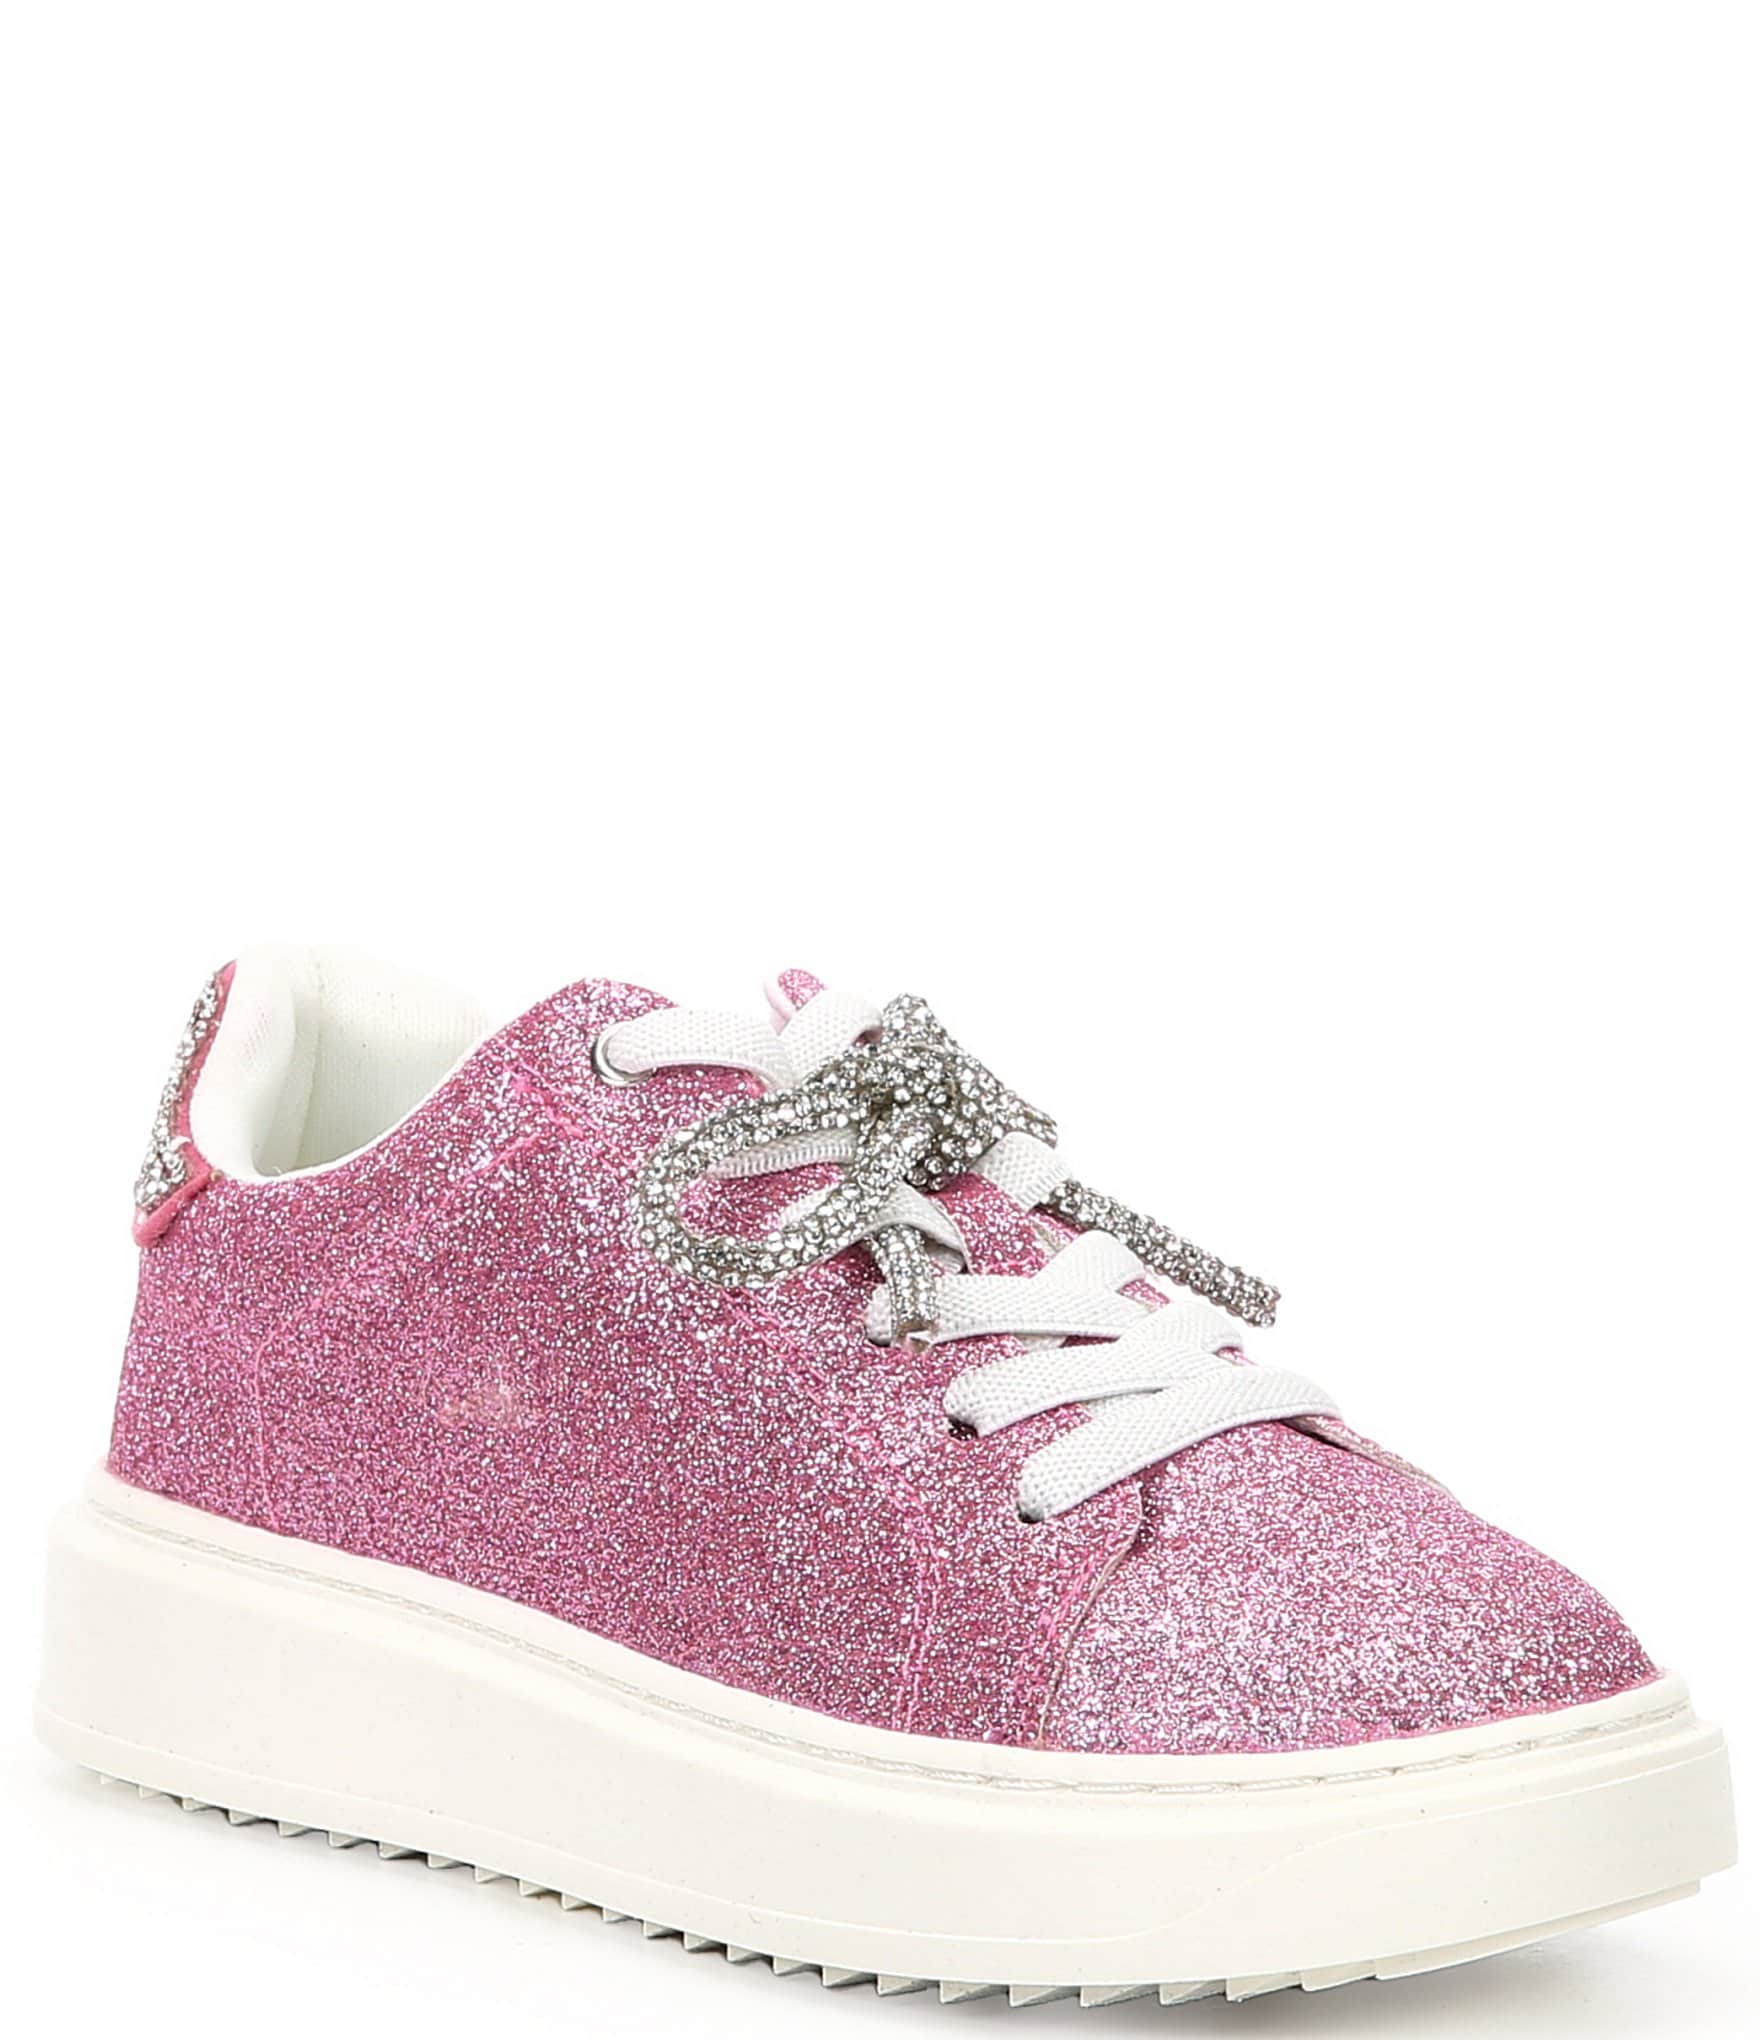 festooning Girls Sneakers Sparkle Glitter Low Top Sneakers for Kids PU  Leather Fashion Shoes with Colorful Shoelace